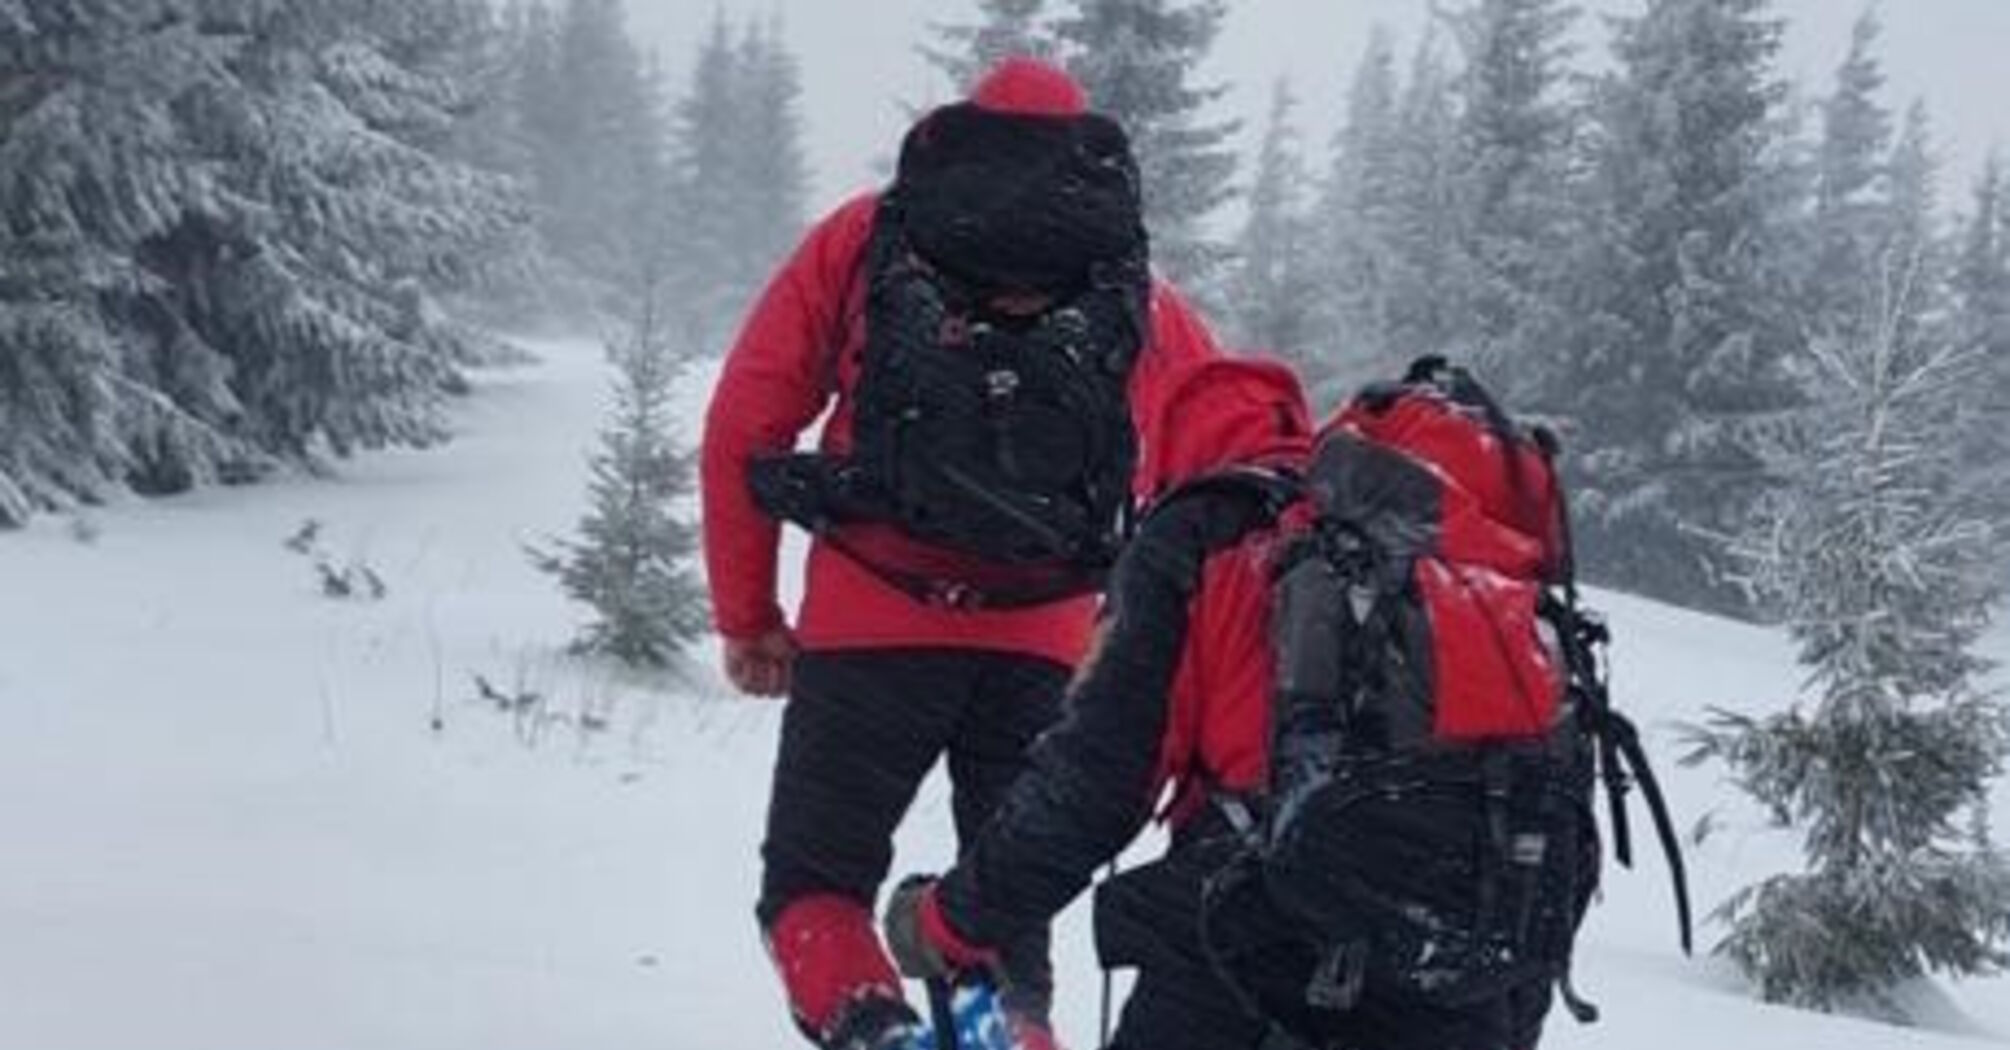 Rescuers search for a Frenchman, who disappeared 2 weeks ago while conquering the highest peak of the Carpathians, Hoverla. Photos